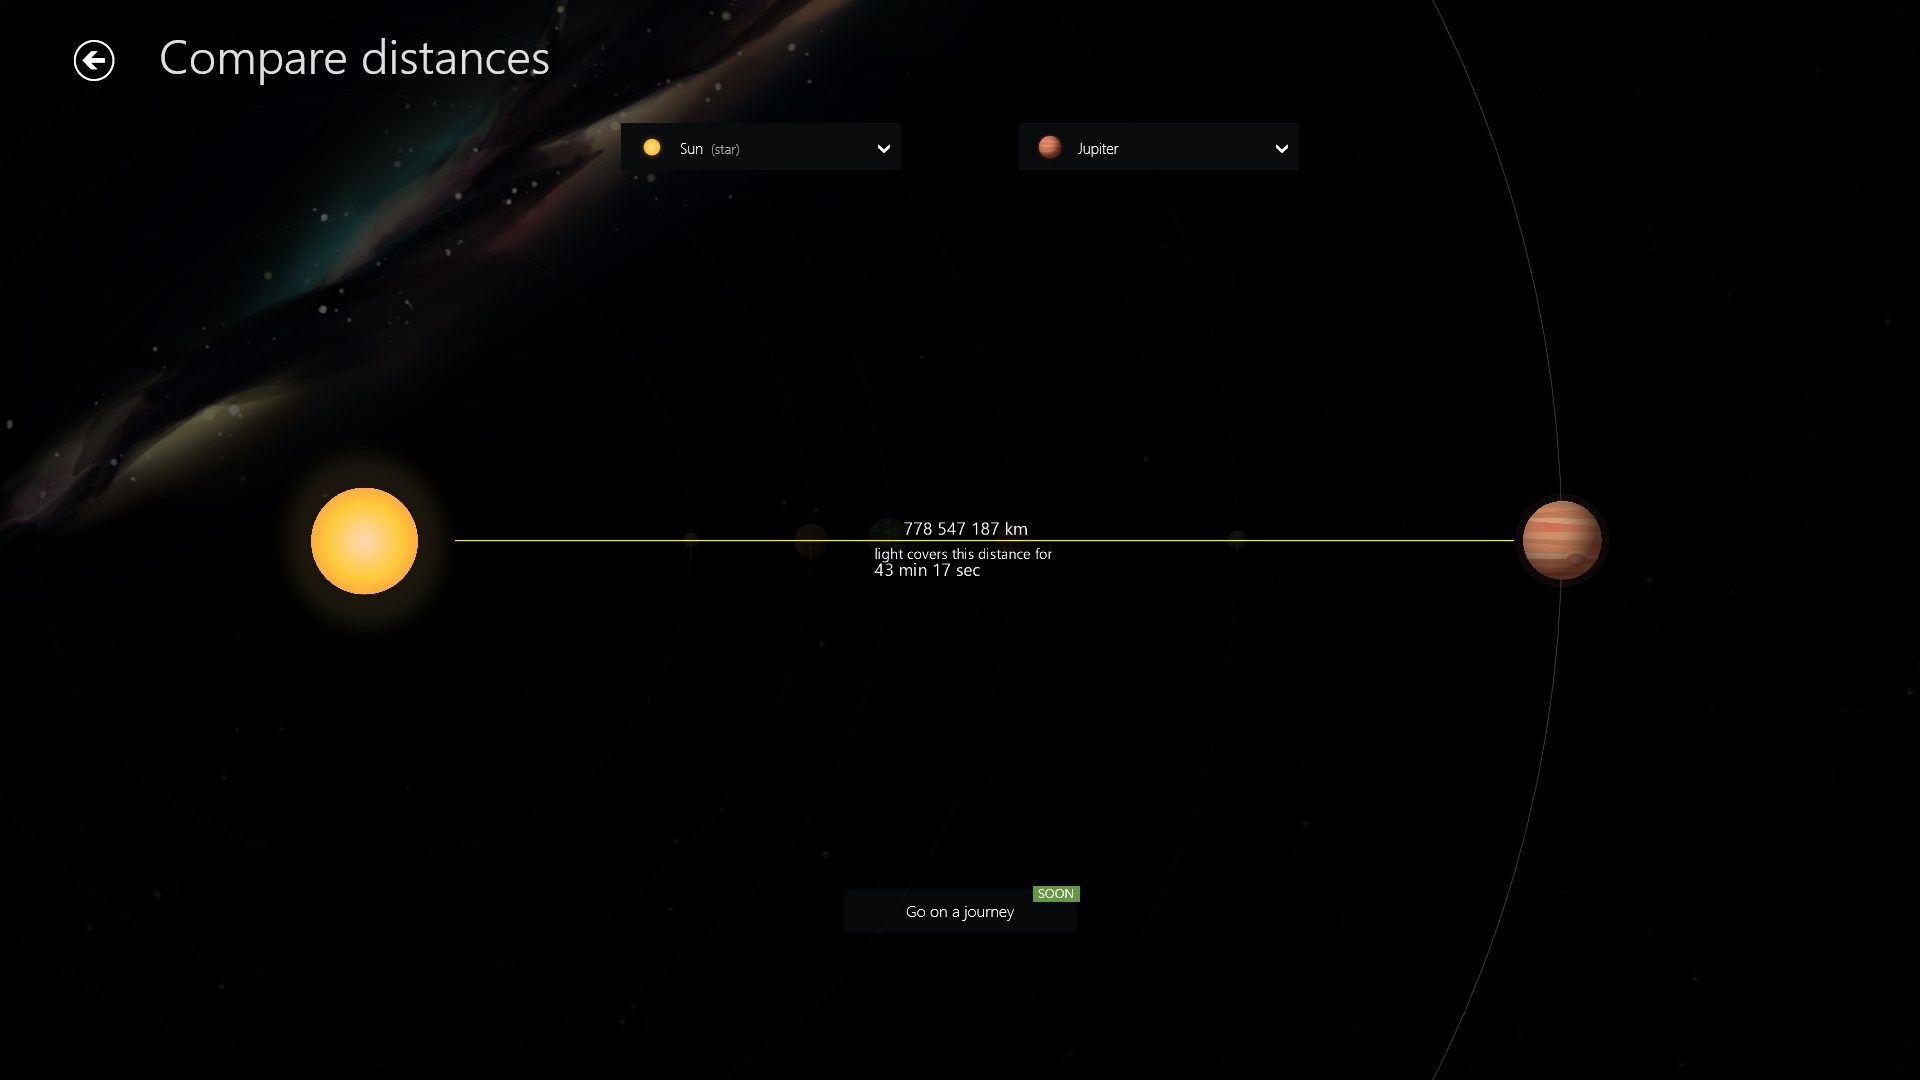 Travel at the speed of light and compare the distances